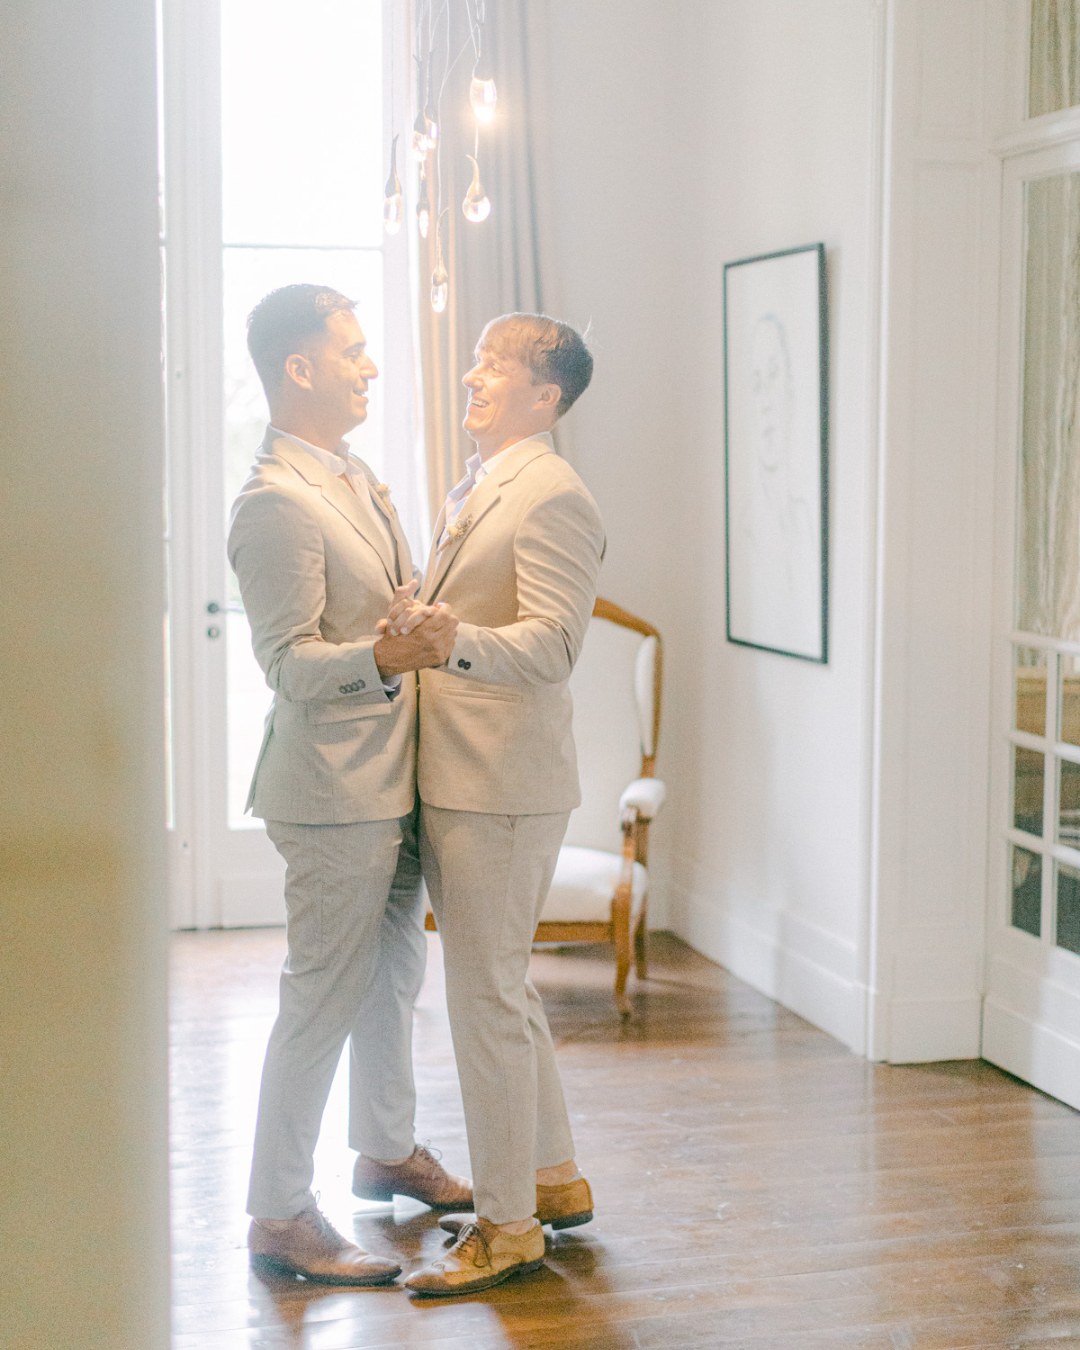 Noel and Daniel joyfully dance together in a bright, elegant room with wooden flooring. A chair and a framed sketch are visible in the background, and the room is softly lit by hanging light bulbs.